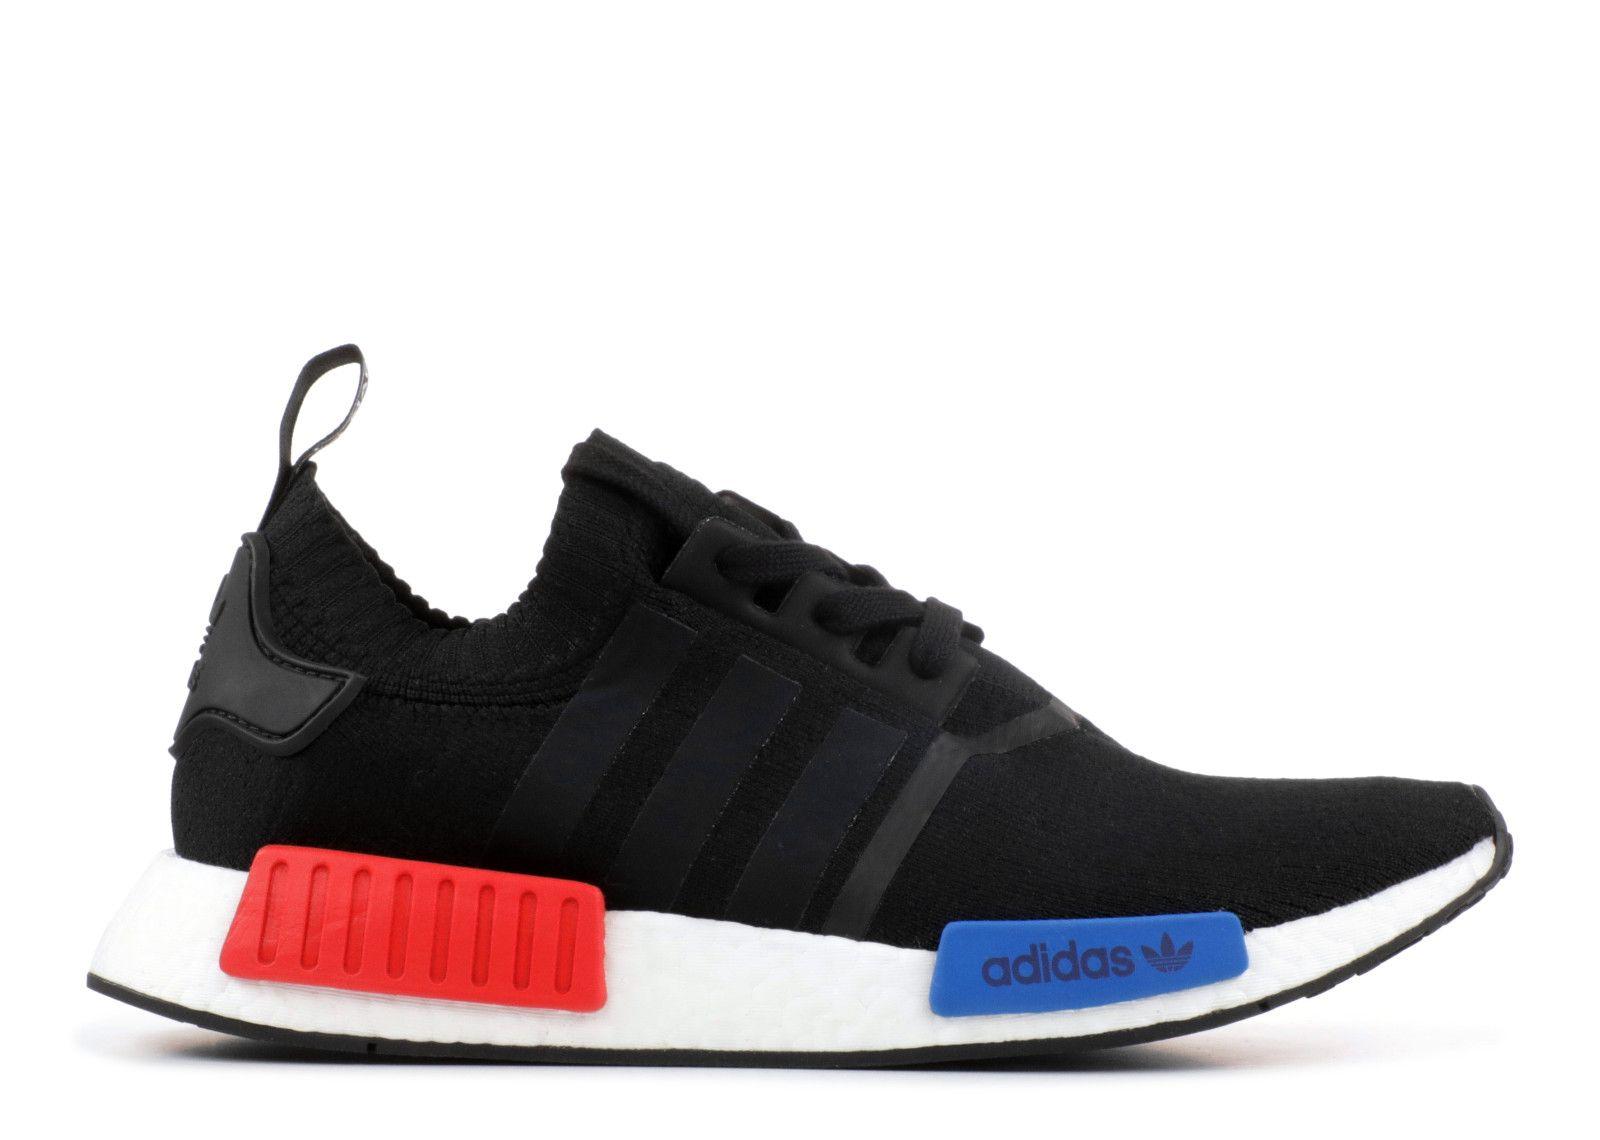 Blue and Red Adidas Logo - Nmd R1 Pk 